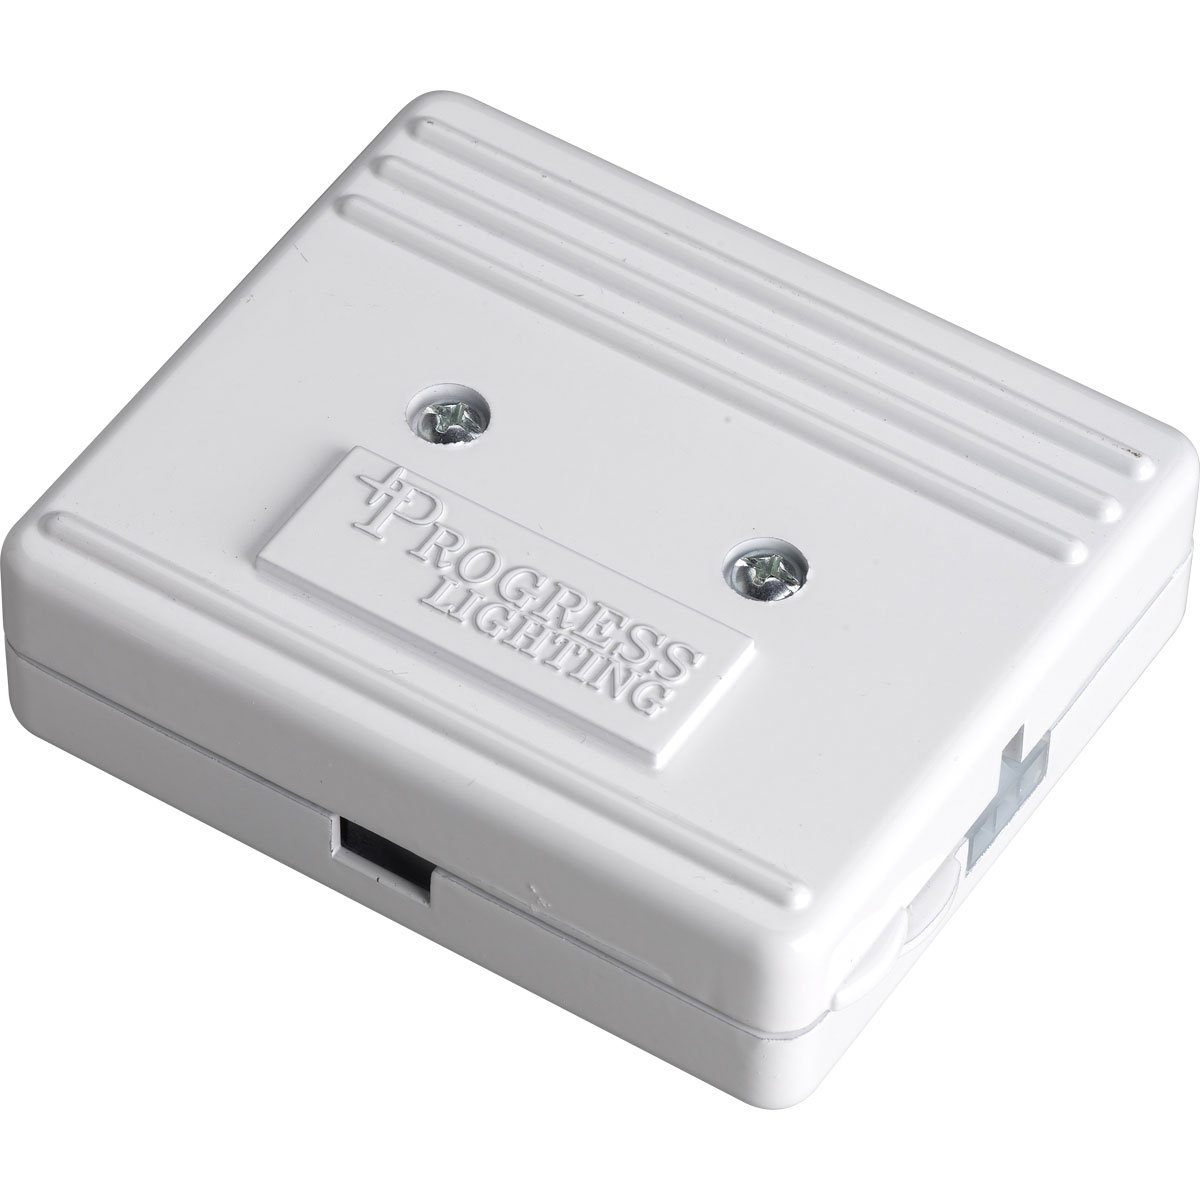 HAL3 junction box in White finish. Accepts direct wire non-metallic wire input and provides power for HAL3 systems.